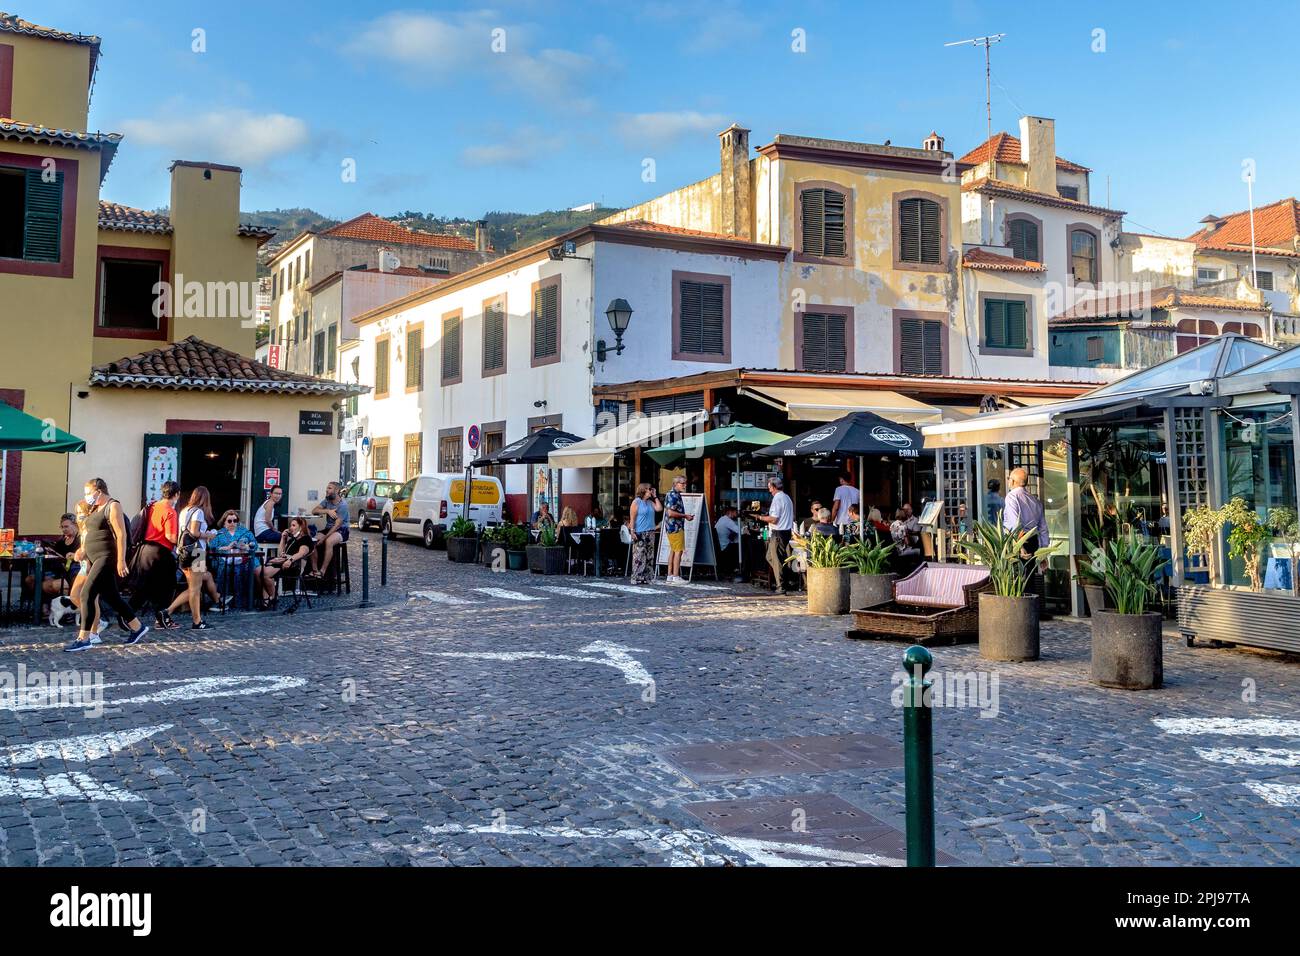 FUNCHAL, PORTUGAL - AUGUST 20, 2021: This is a small square in the old seaside area of the city (Zona Velha) with many small cafes. Stock Photo